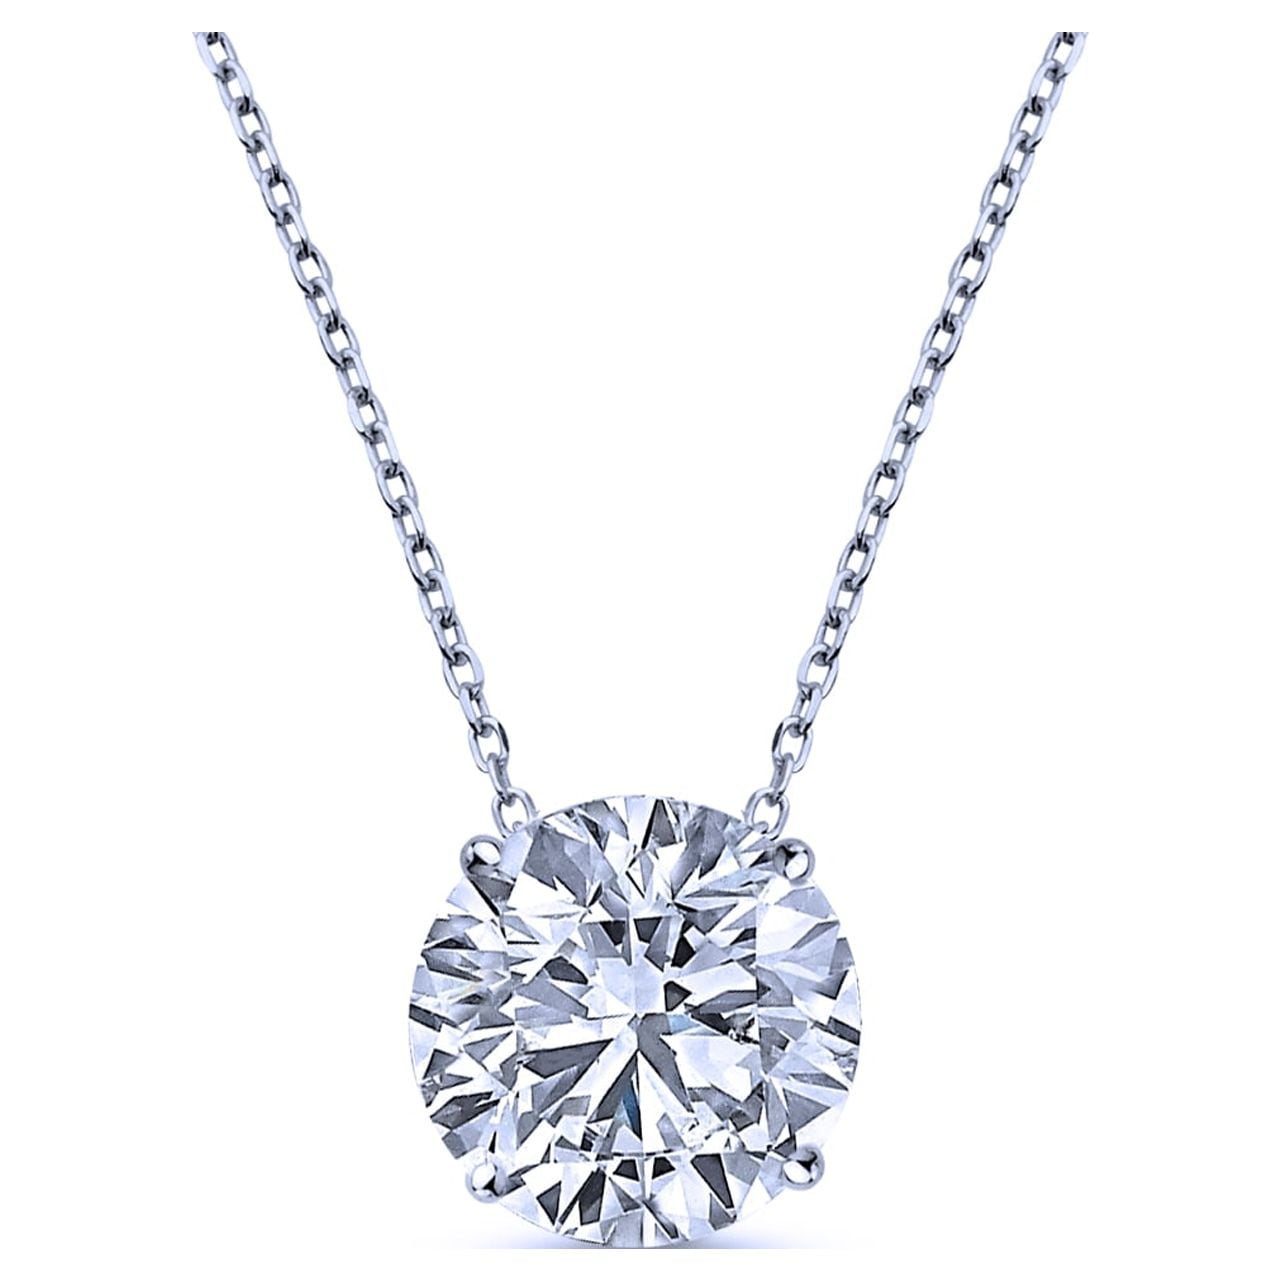 1 Carat Round Cut Moissanite Solitaire Pendant Necklace in 18k White Gold  over Silver, Female, Adult 